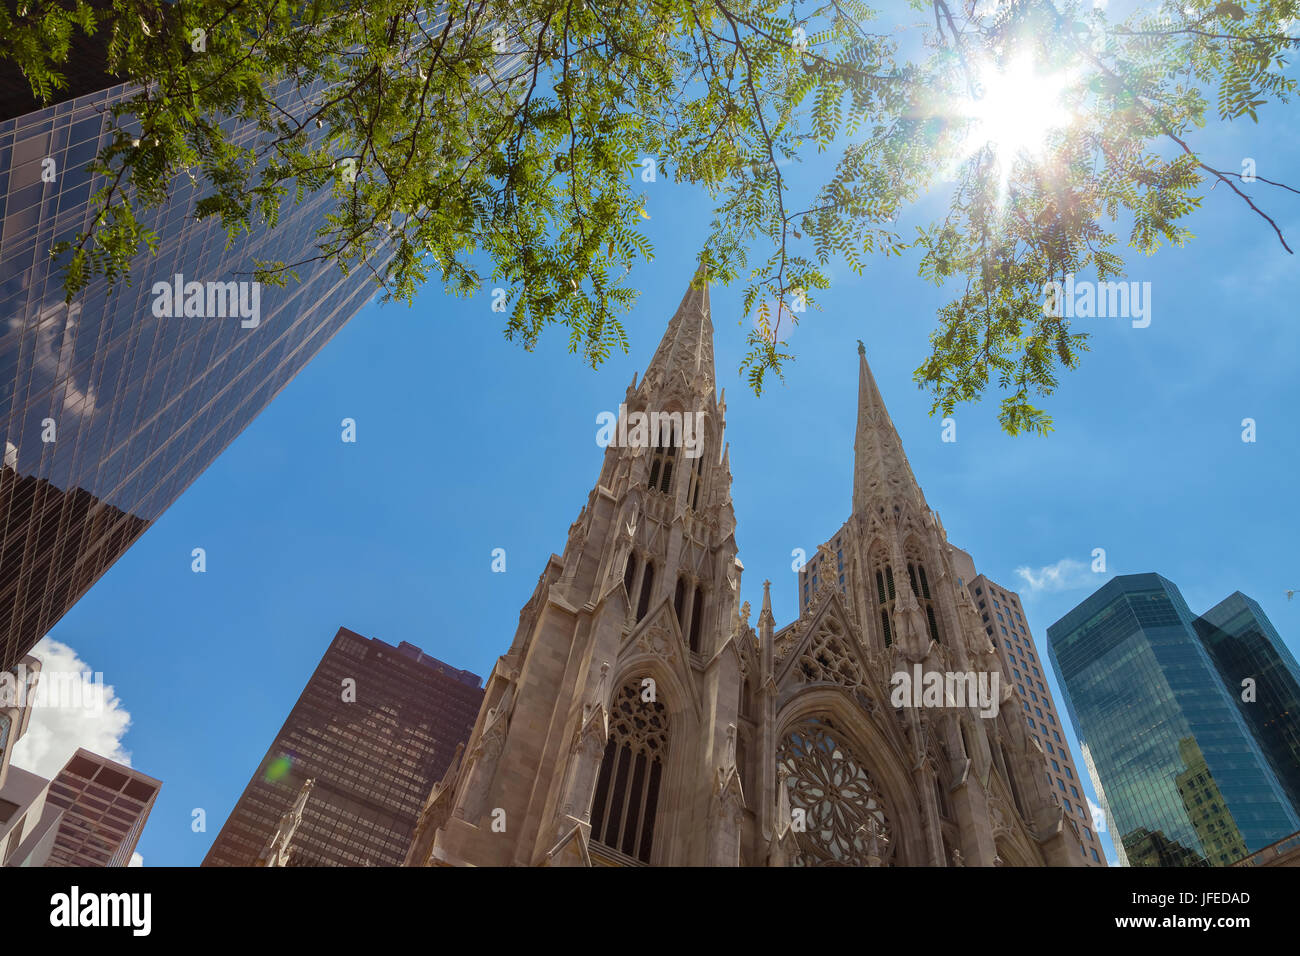 The architectural structures of the St. Patrick's Cathedral in New York City, USA Stock Photo